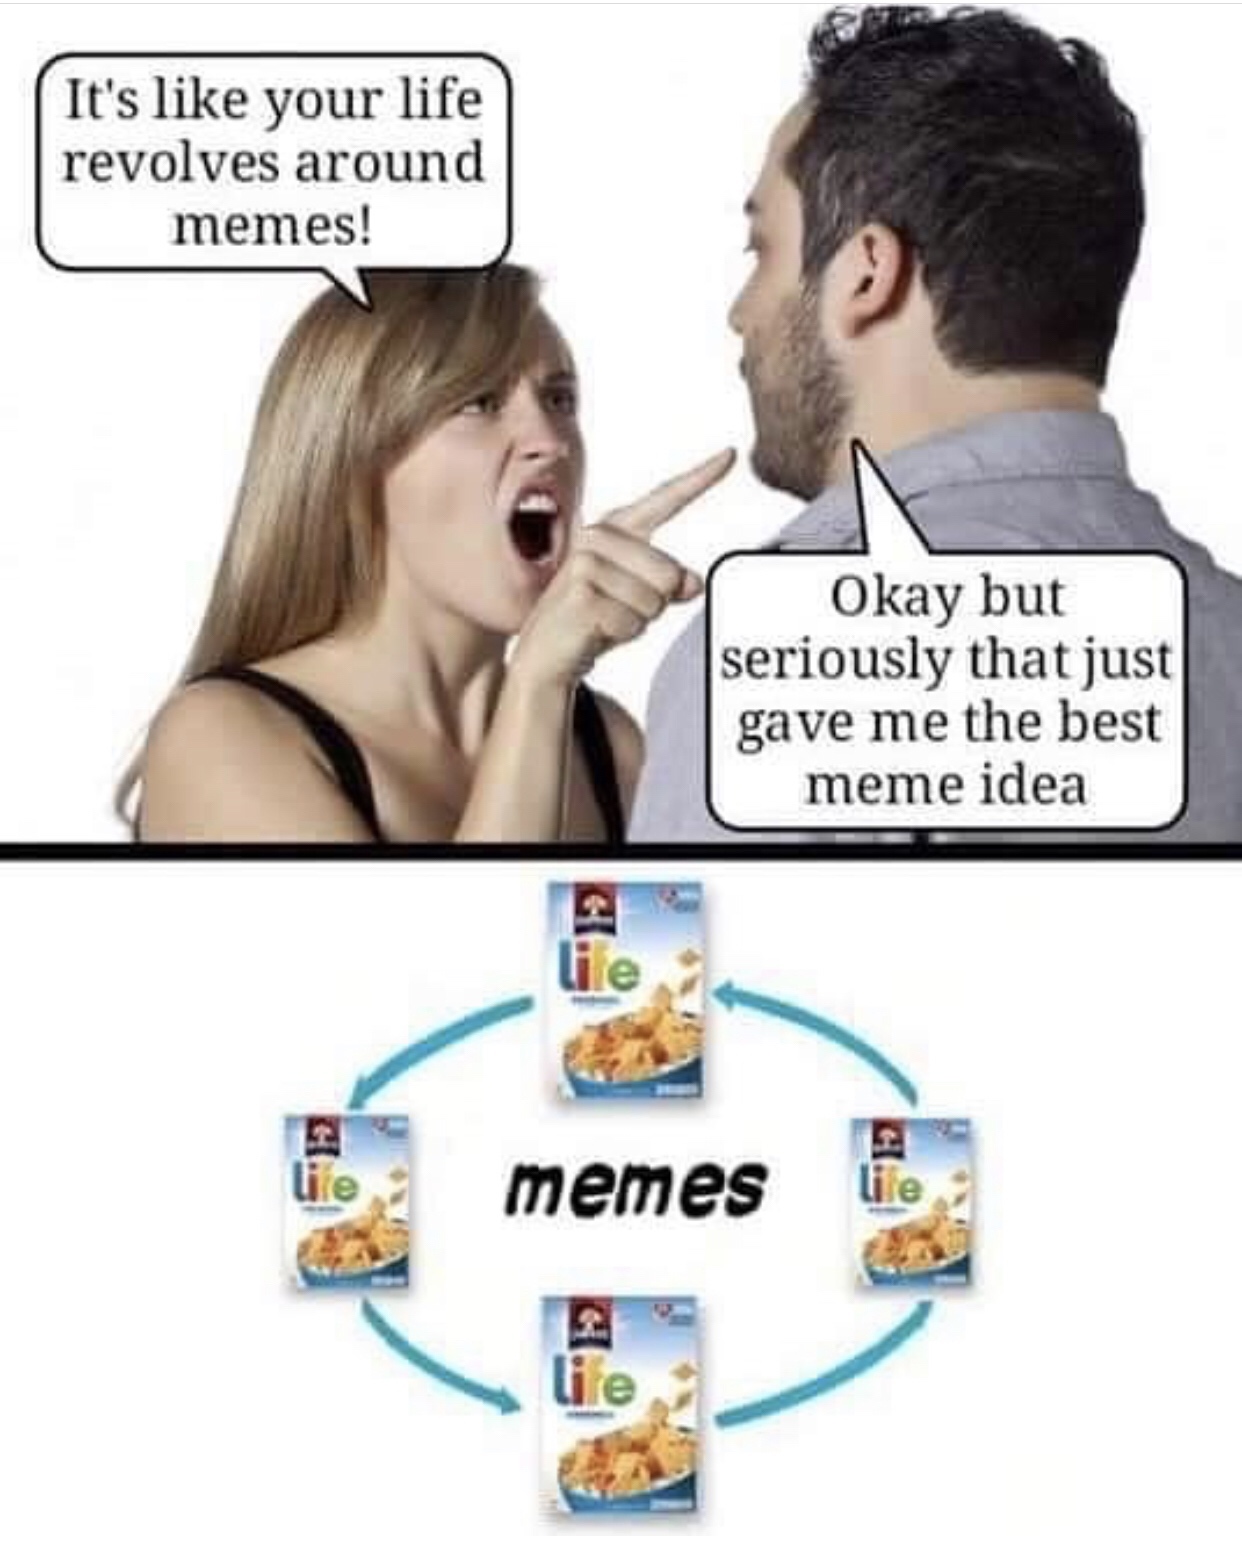 life revolves around memes - It's your life revolves around memes! Okay but seriously that just| gave me the best meme idea memes